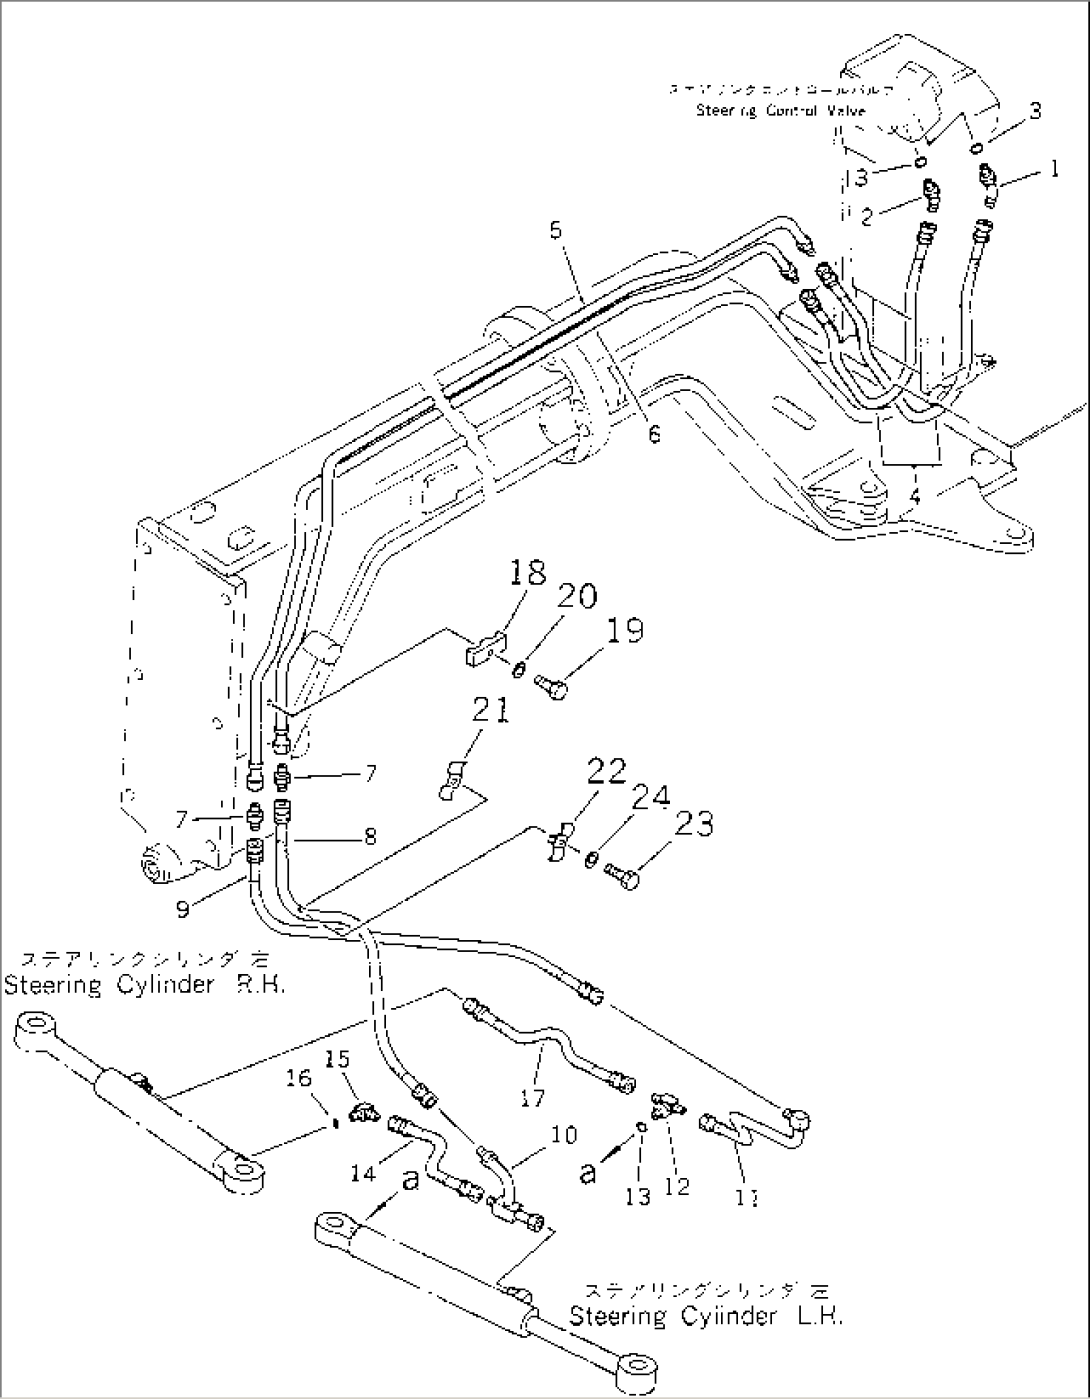 STEERING PIPING (2/2) (VALVE TO CYLINDER)